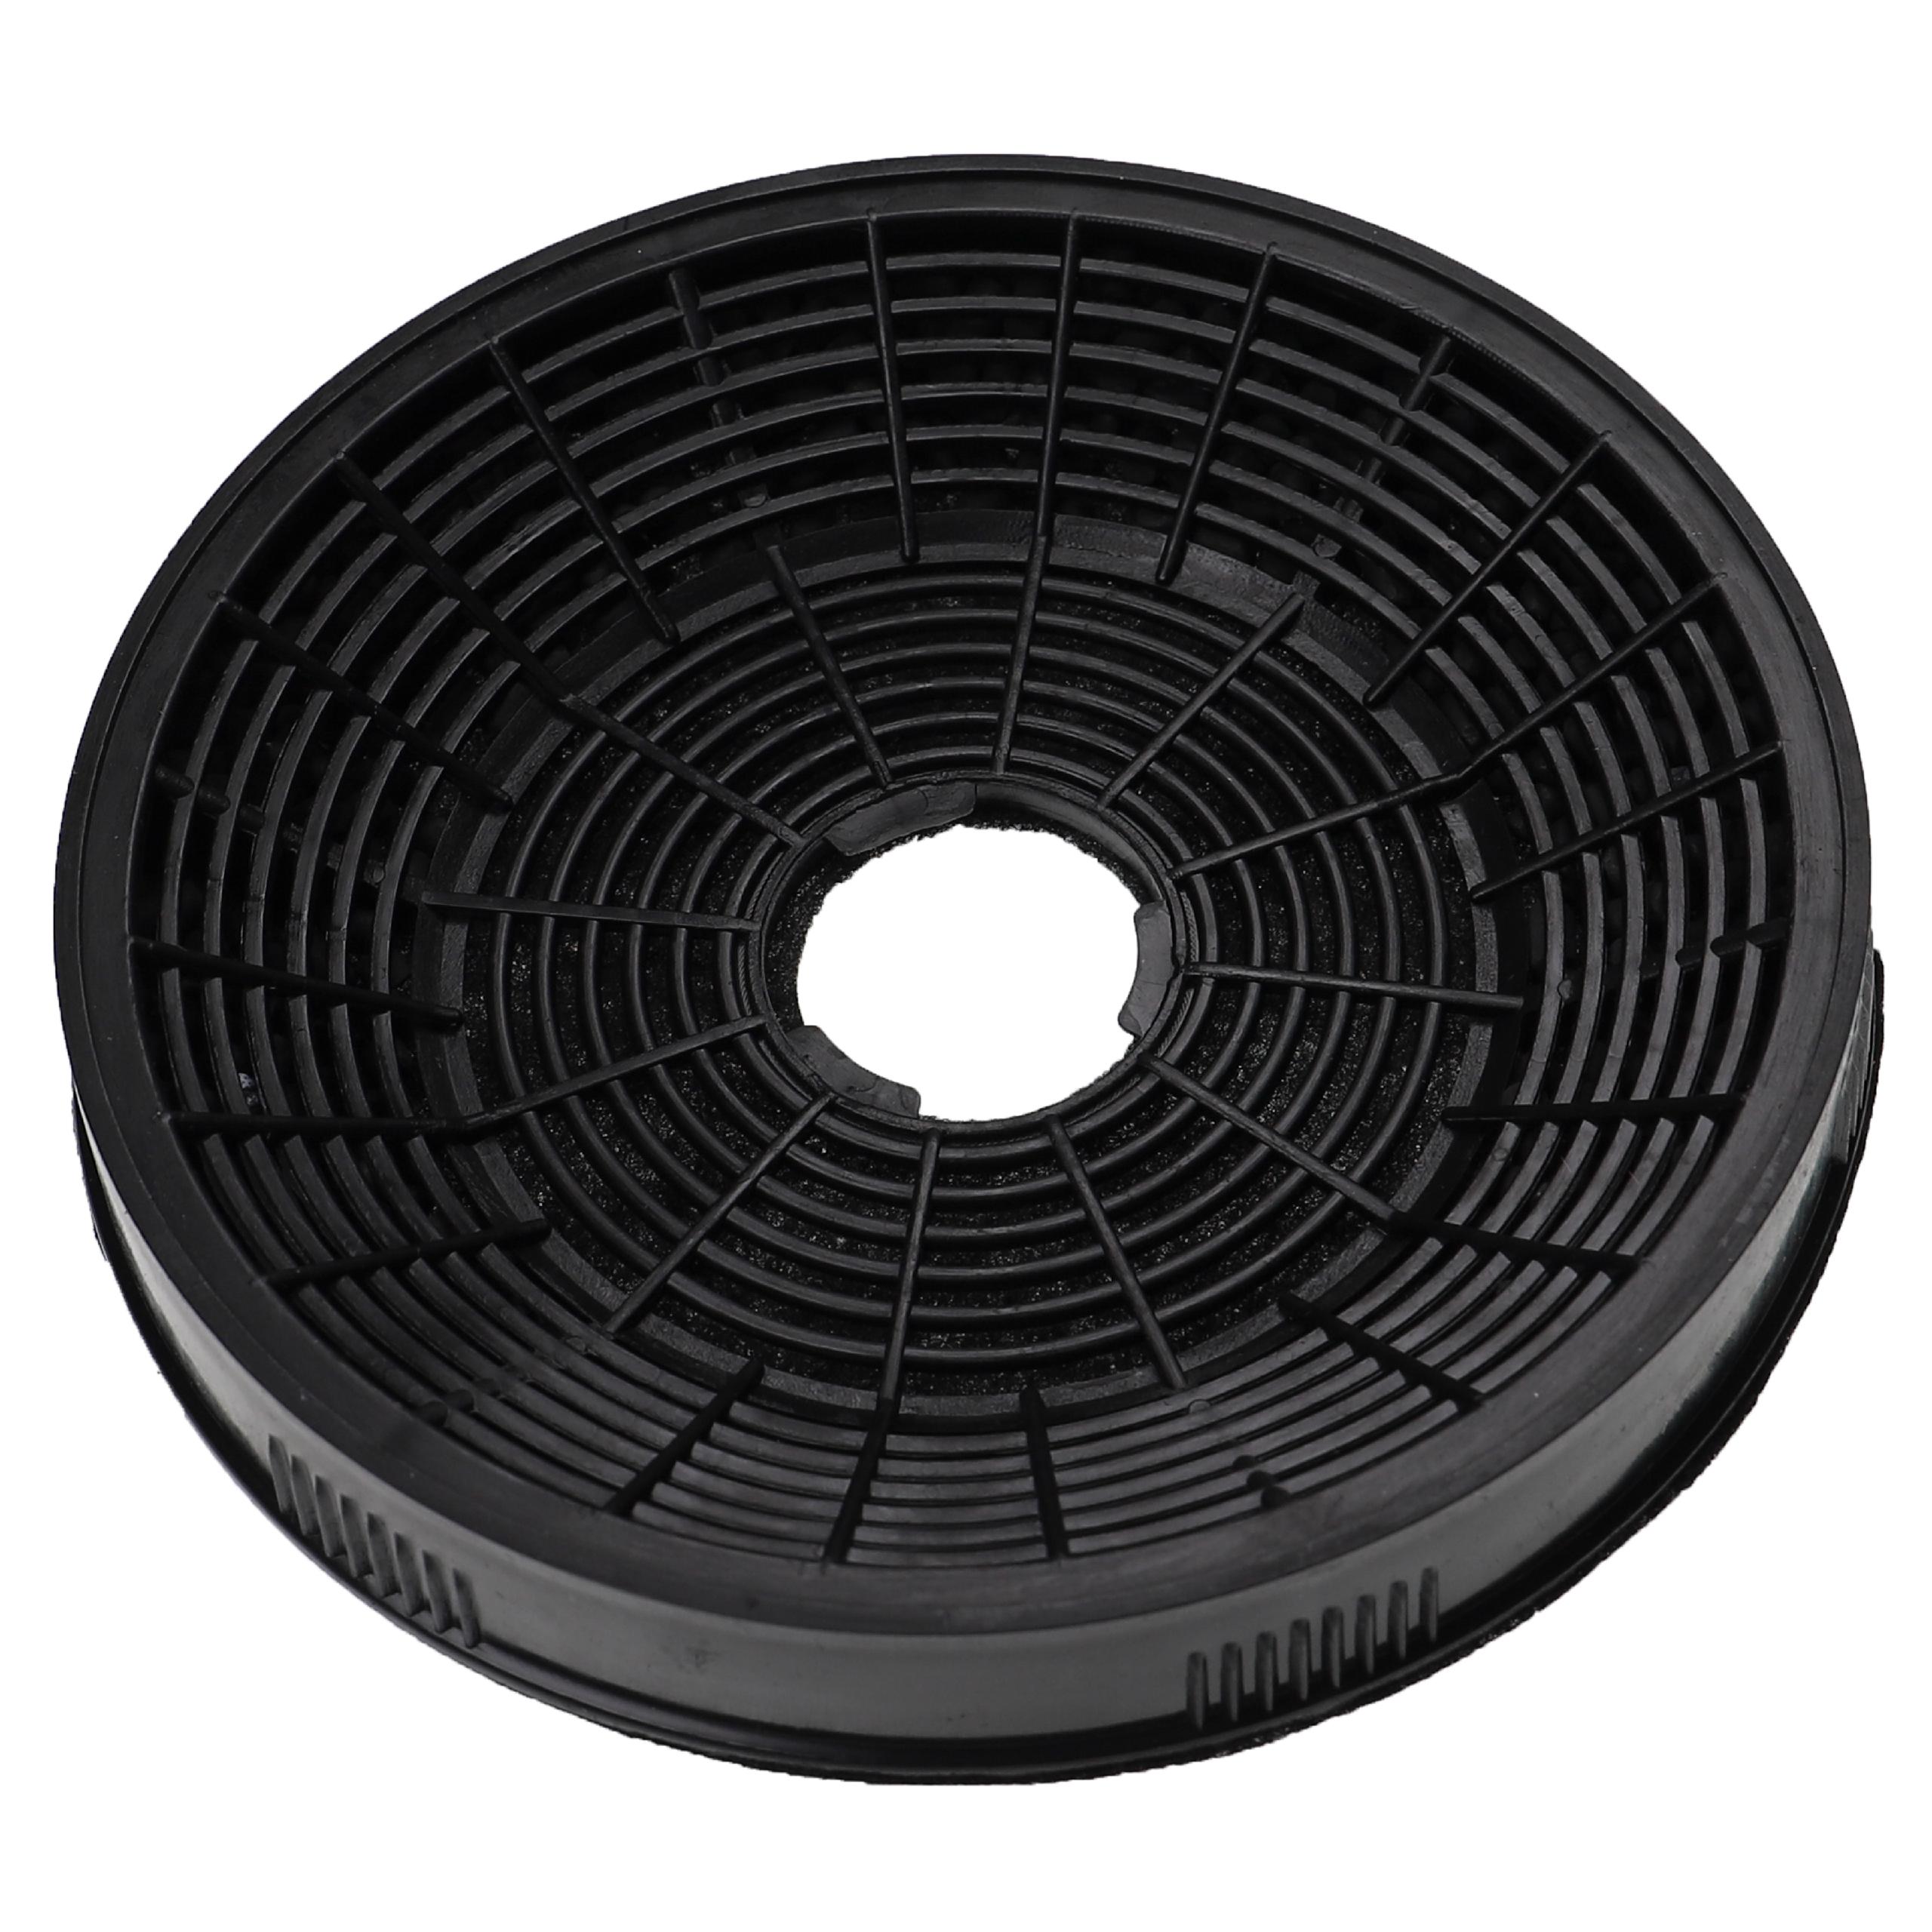 Activated Carbon Filter as Replacement for Amica KF 17146 for Amica Hob etc. - 16 cm